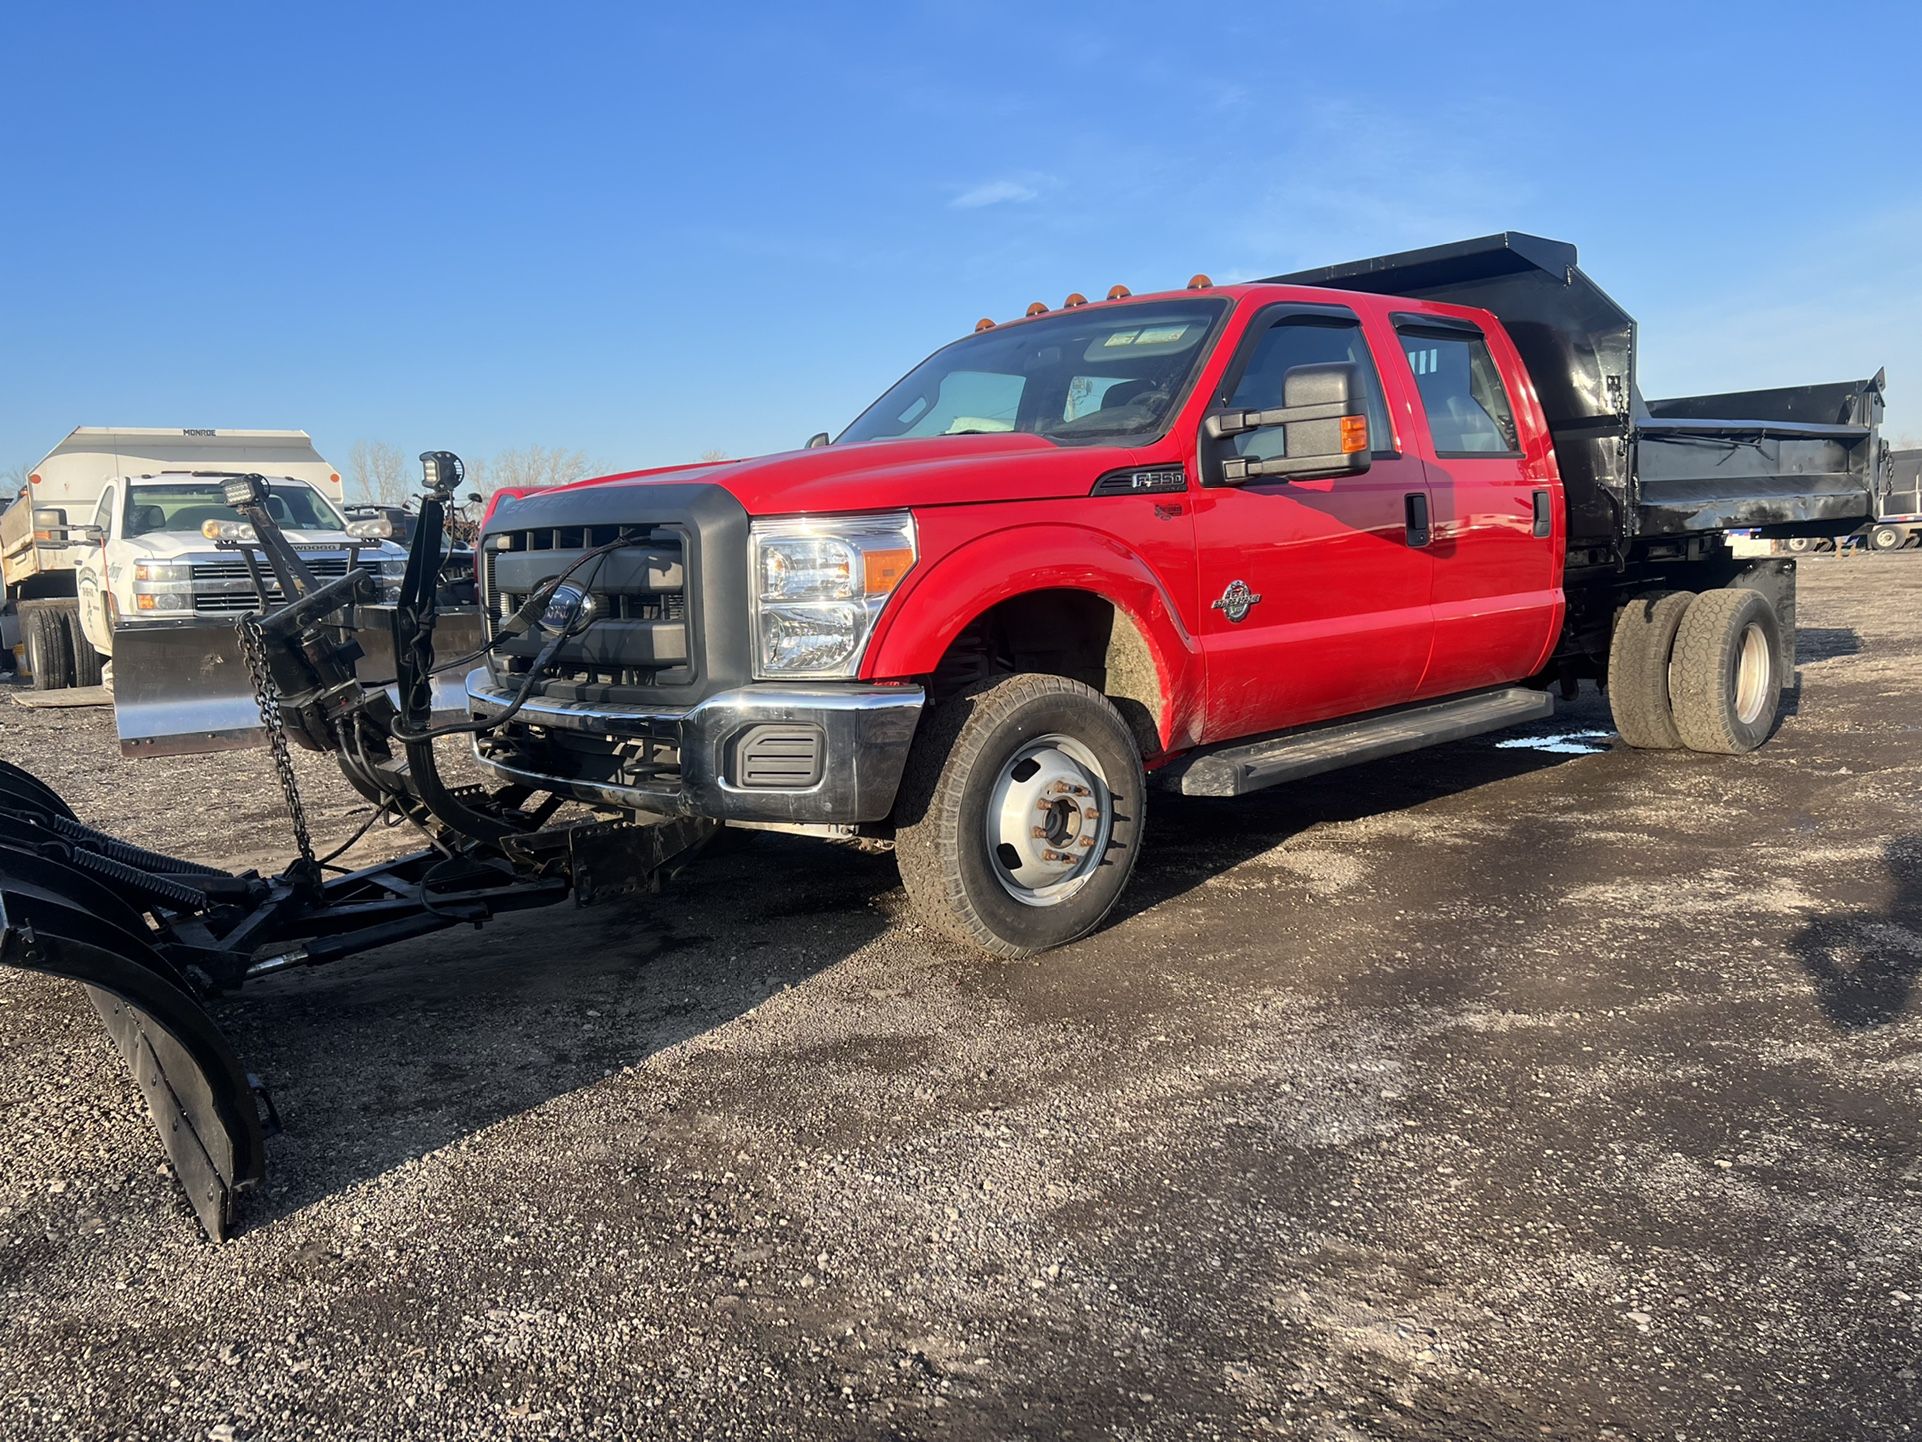 2015 Ford F-450